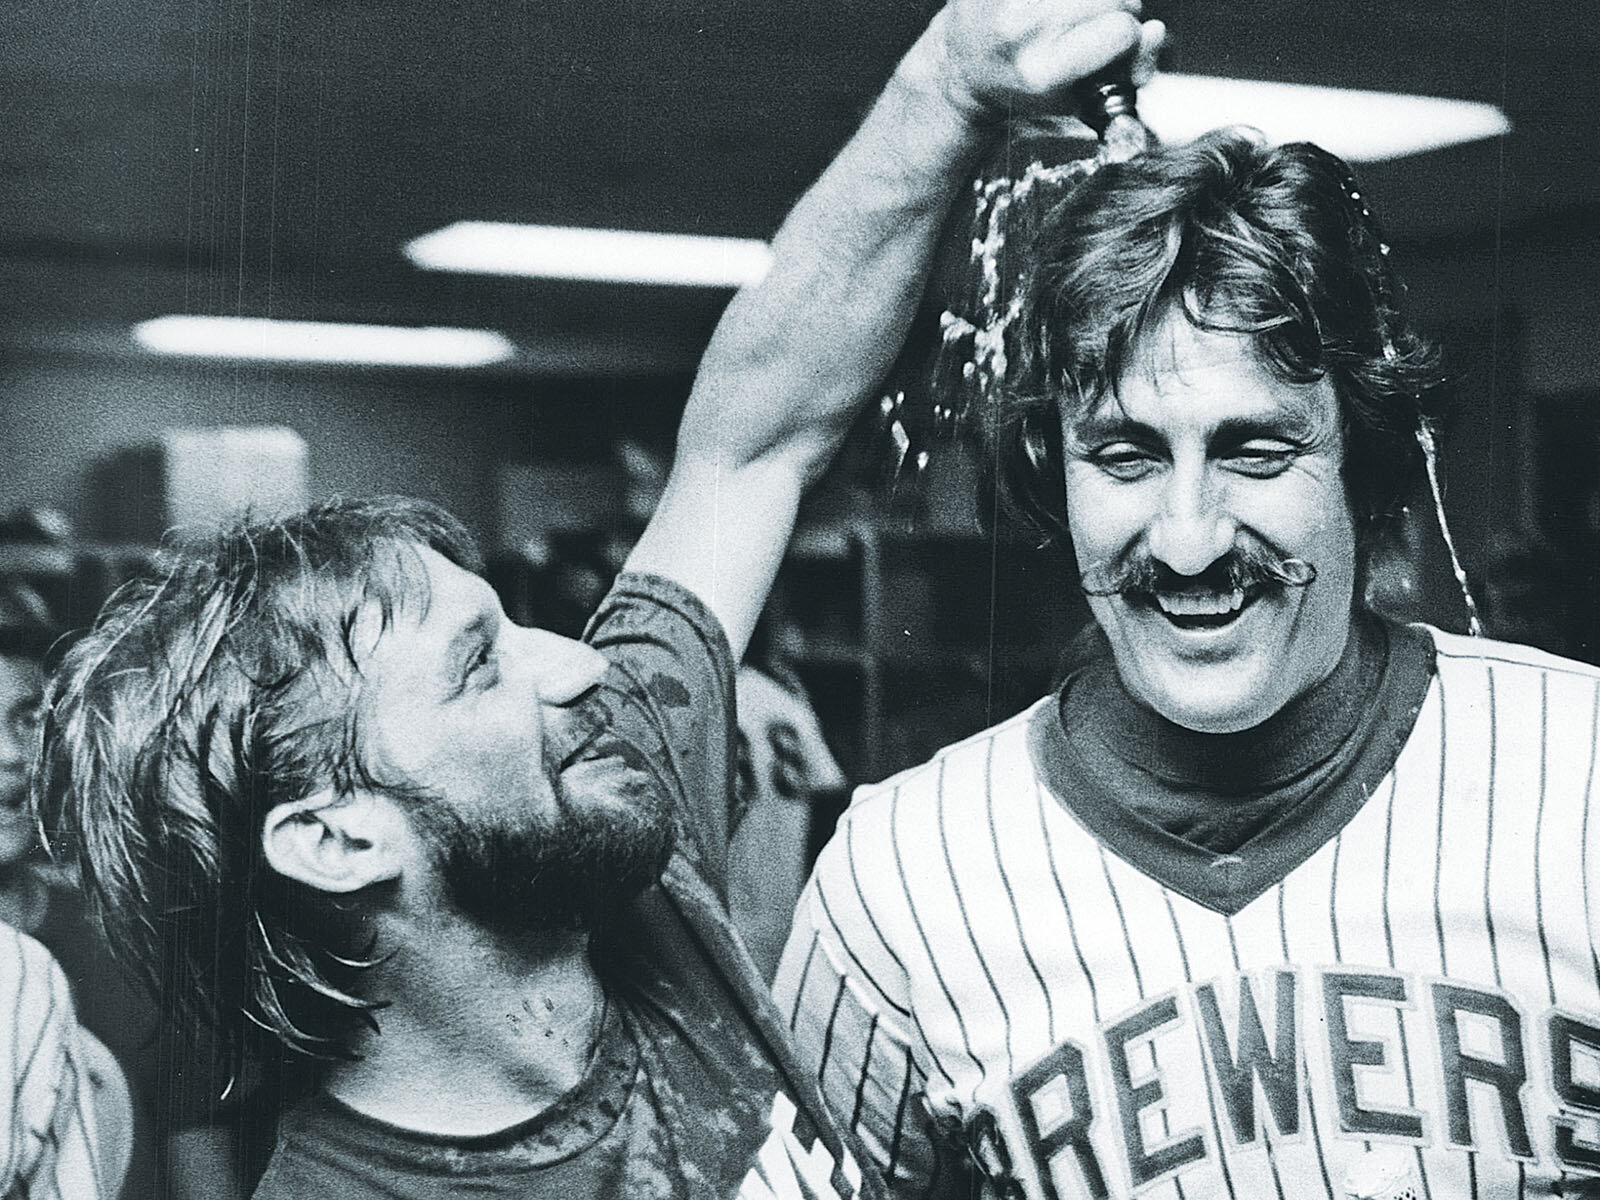 on/robin yount - Stories on robin yount, sports, brewers, baseball